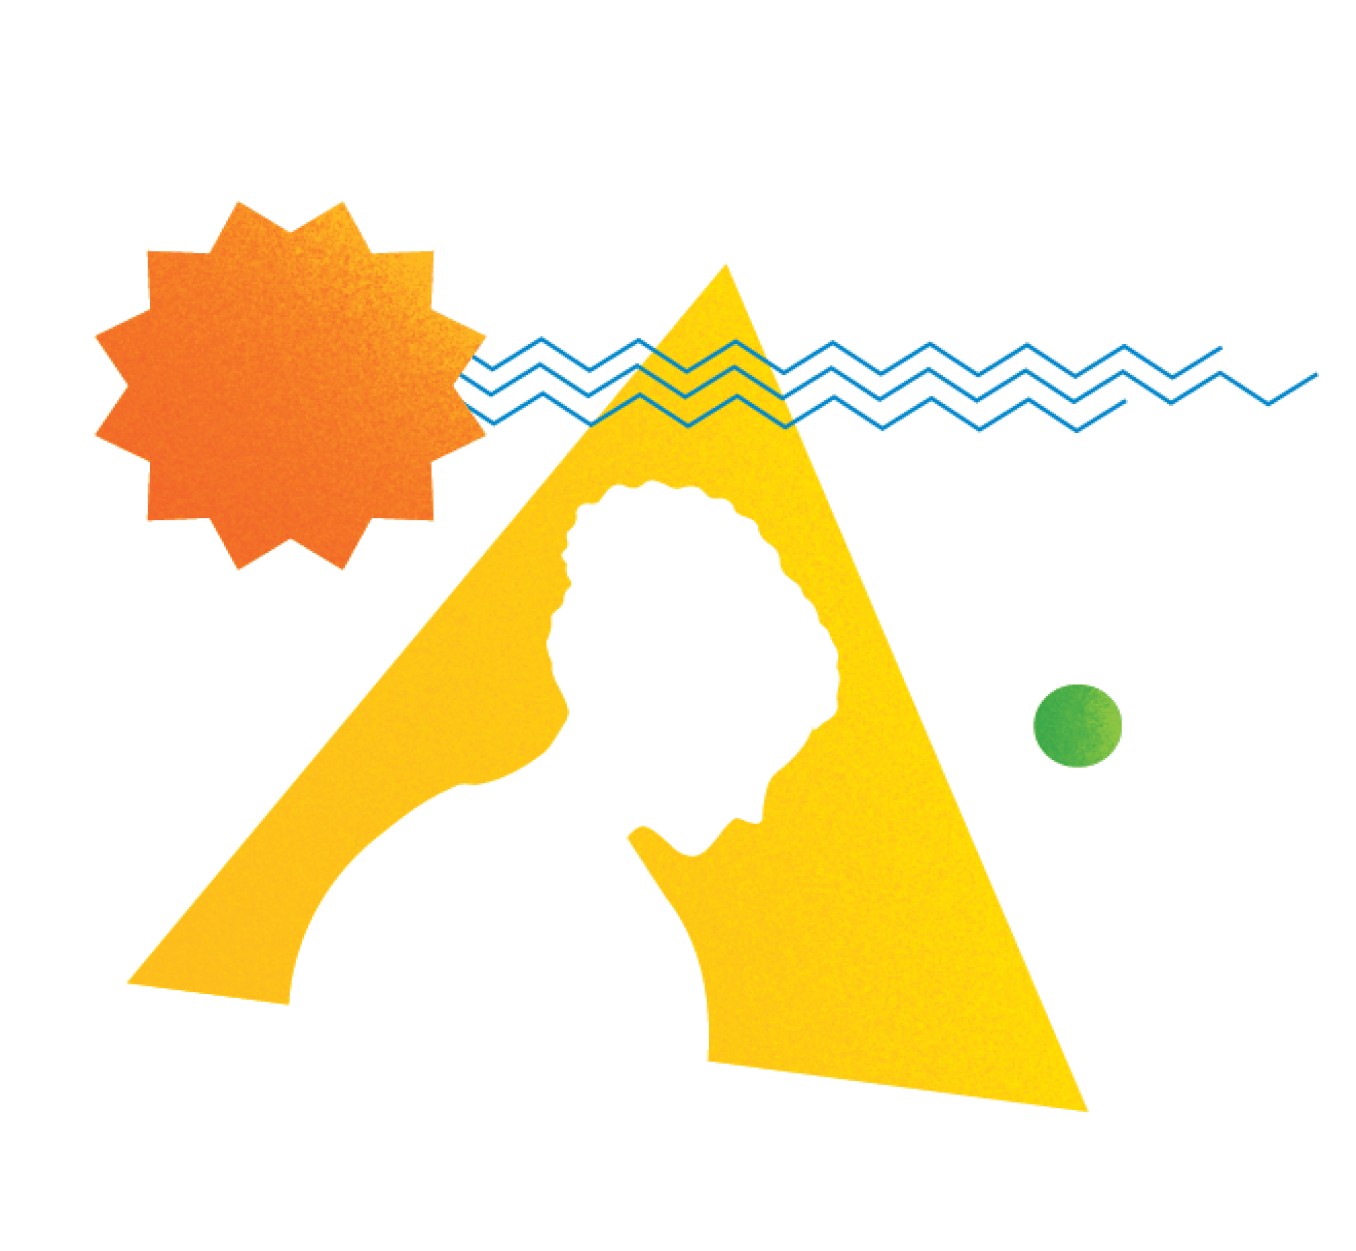 Illustration of a person in silhouette gazing downwards, surrounded by shapes and lines creating a sense of sadness or distress.